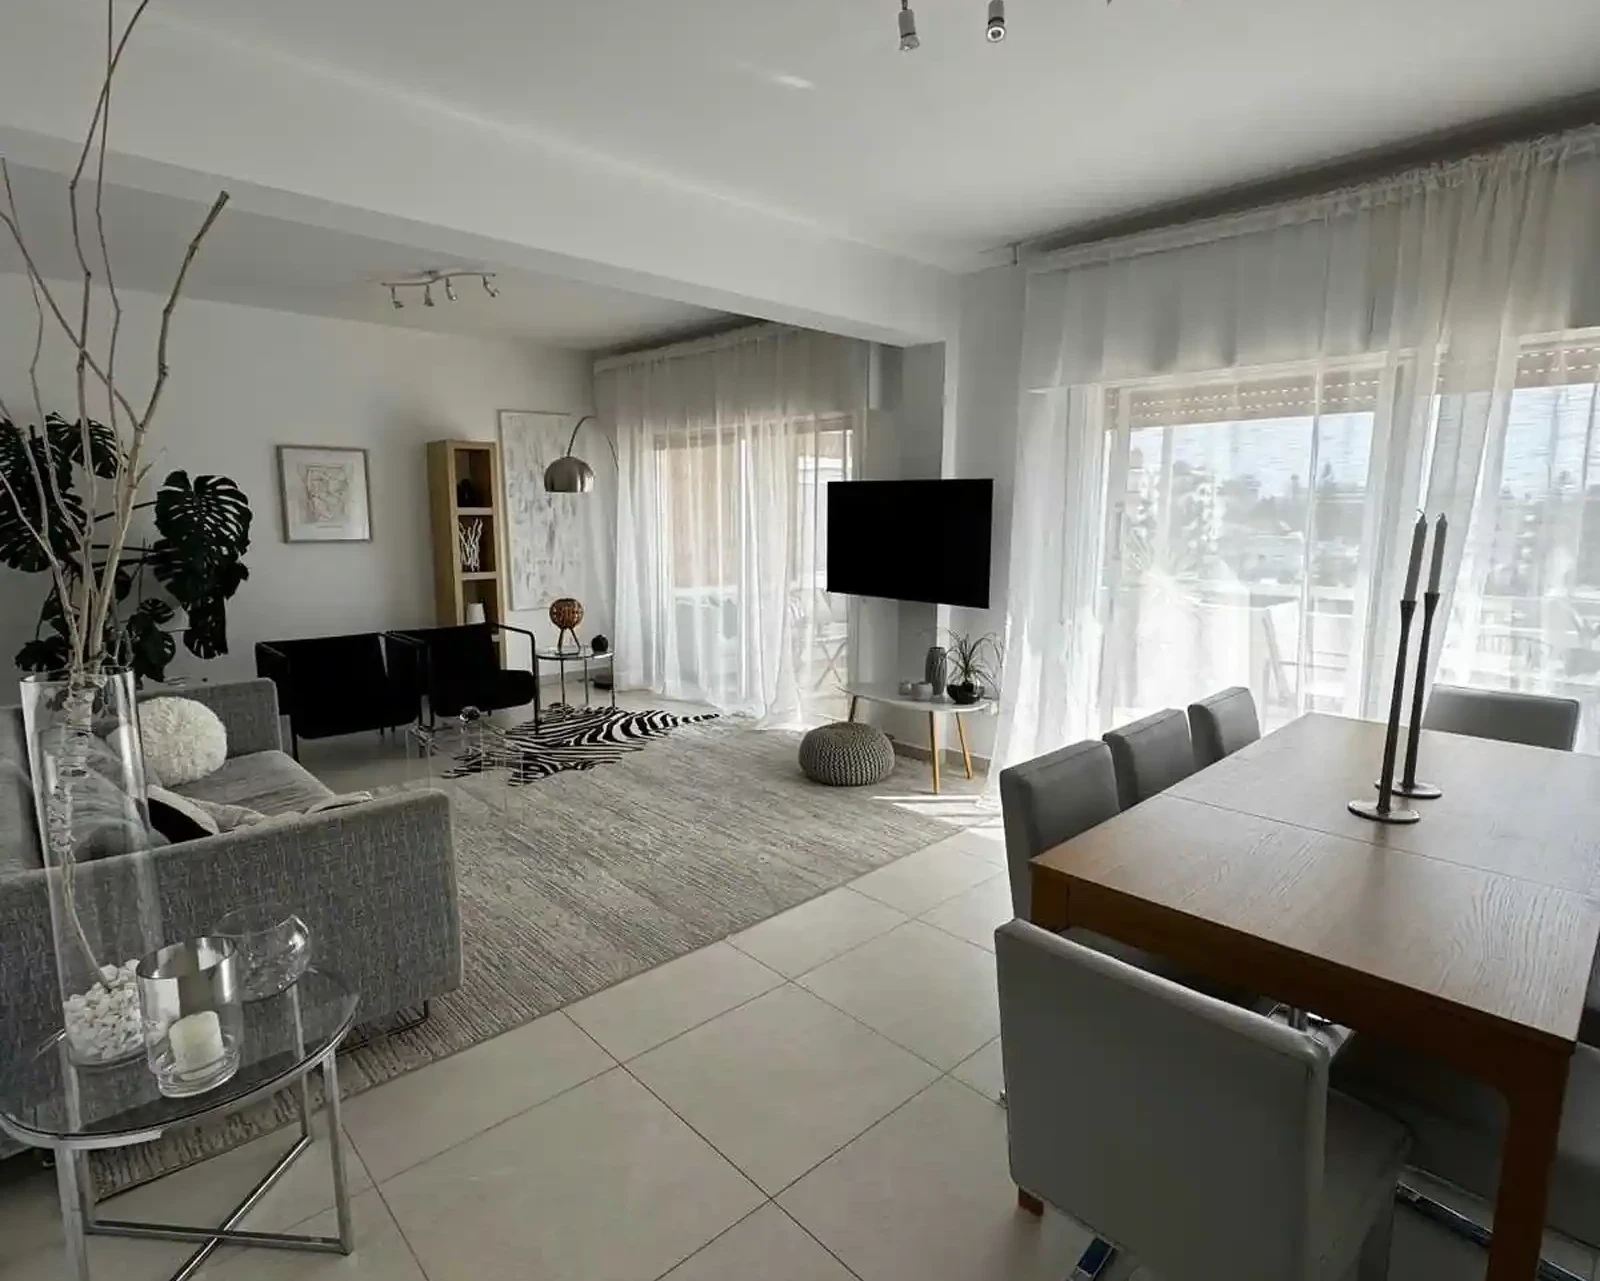 3-bedroom penthouse to rent €2.450, image 1